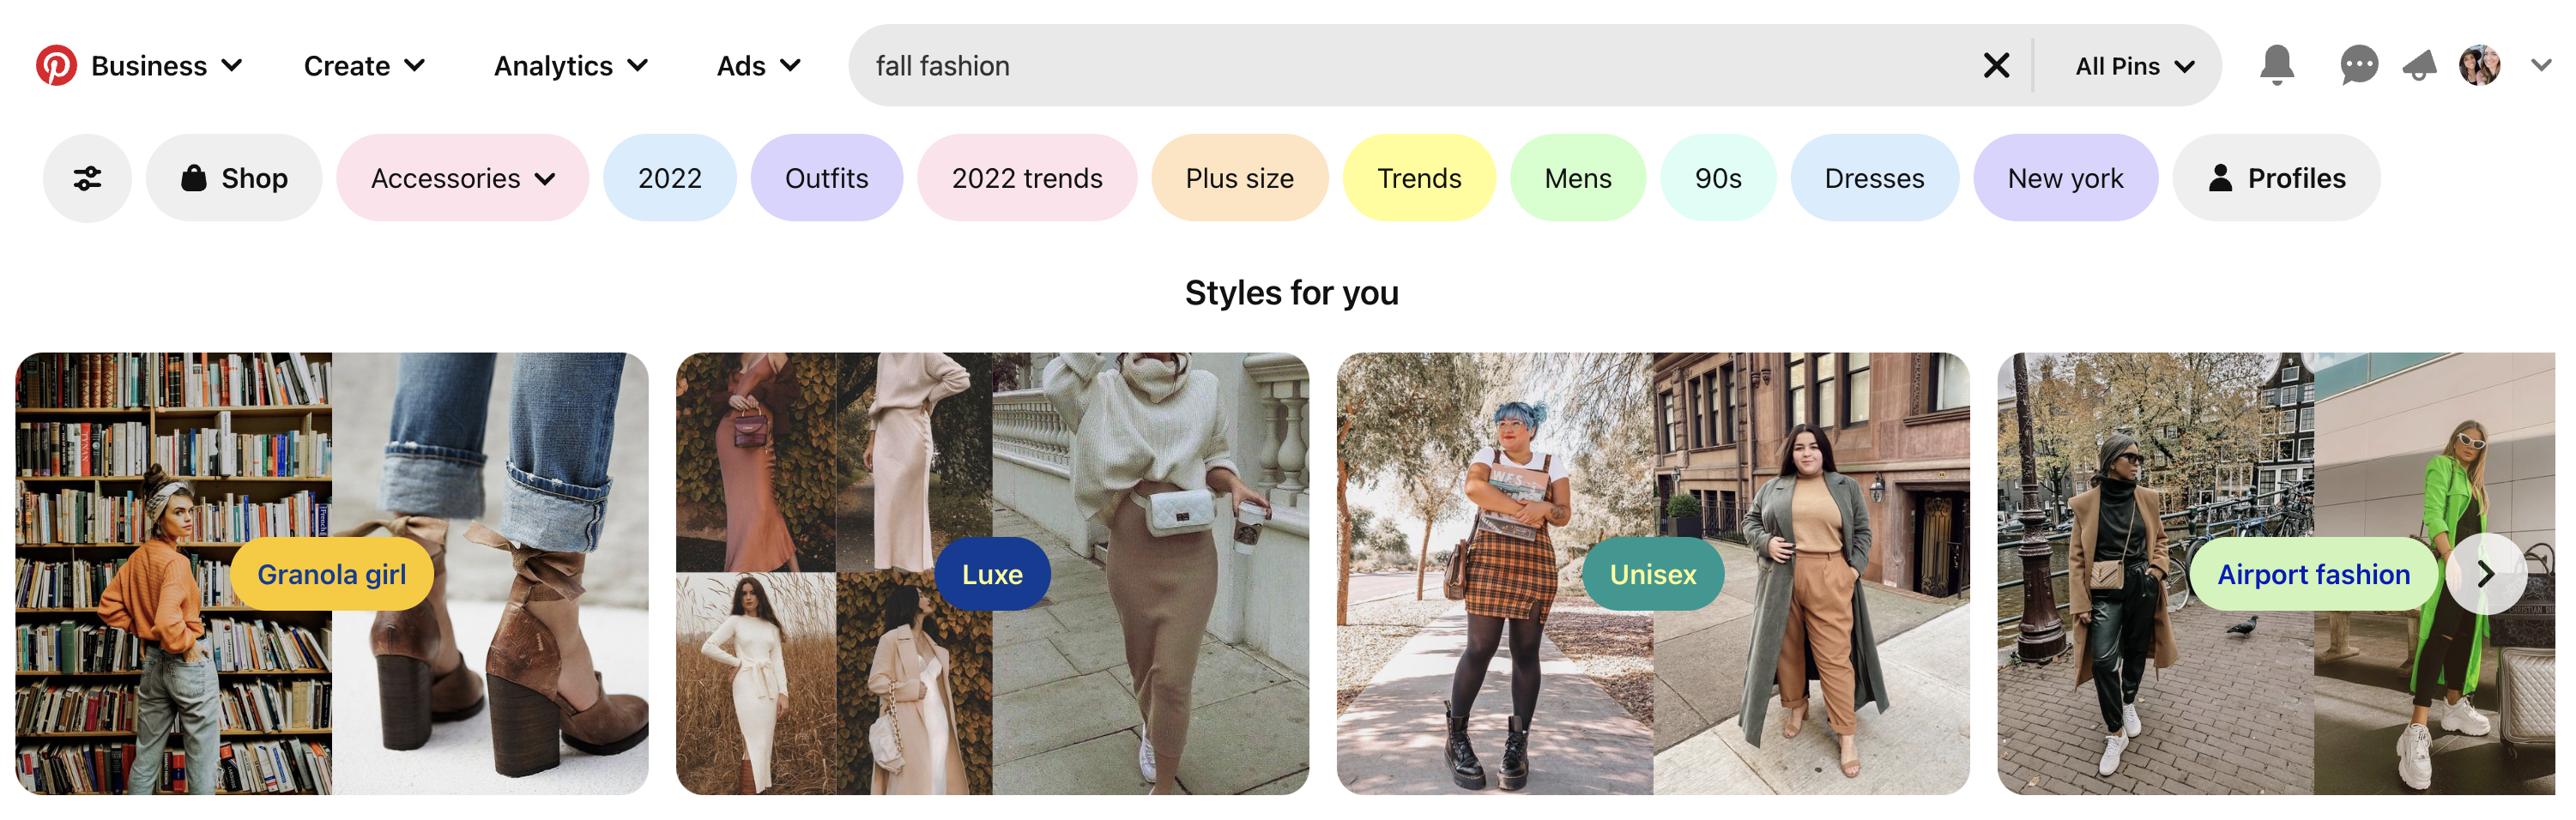 how to find keywords with the pinterest search bar